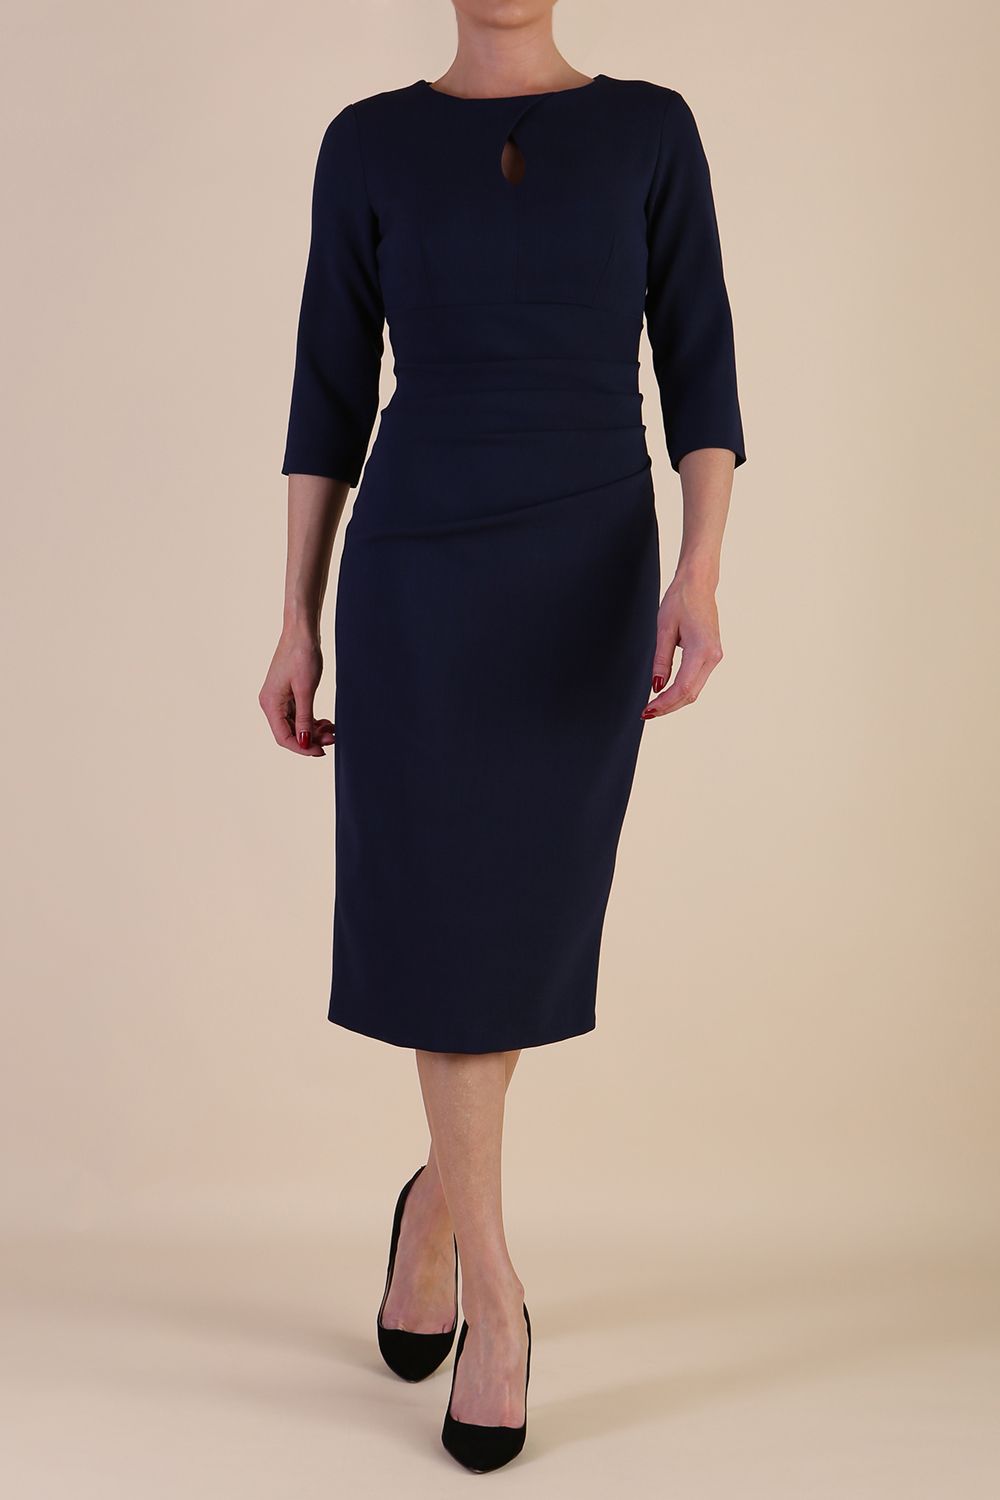 model is wearing the Diva Catwalk Ubrique pencil dress with Long sleeves and keyhole detail in Navy Blue fabric colour